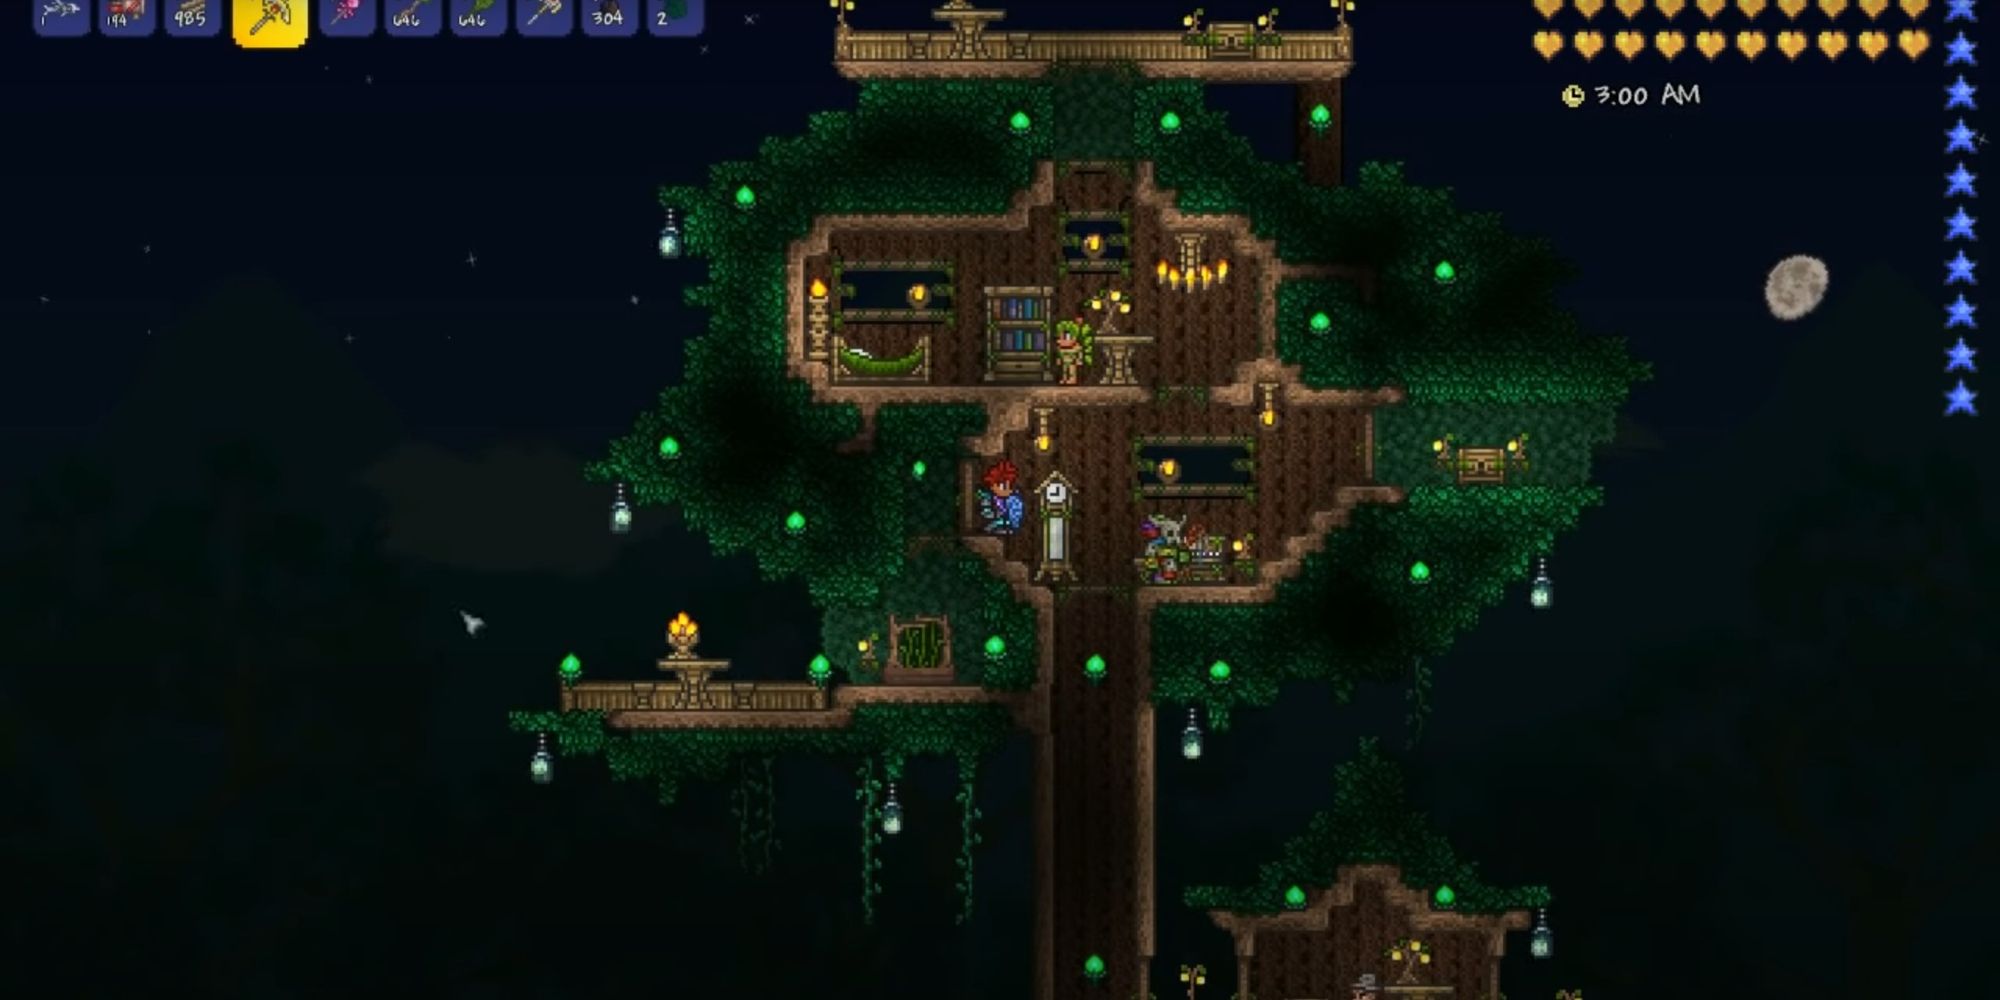 An image from Terraria of a Giant Treehouse, with different rooms built within the thick brances and leaves of the tree.